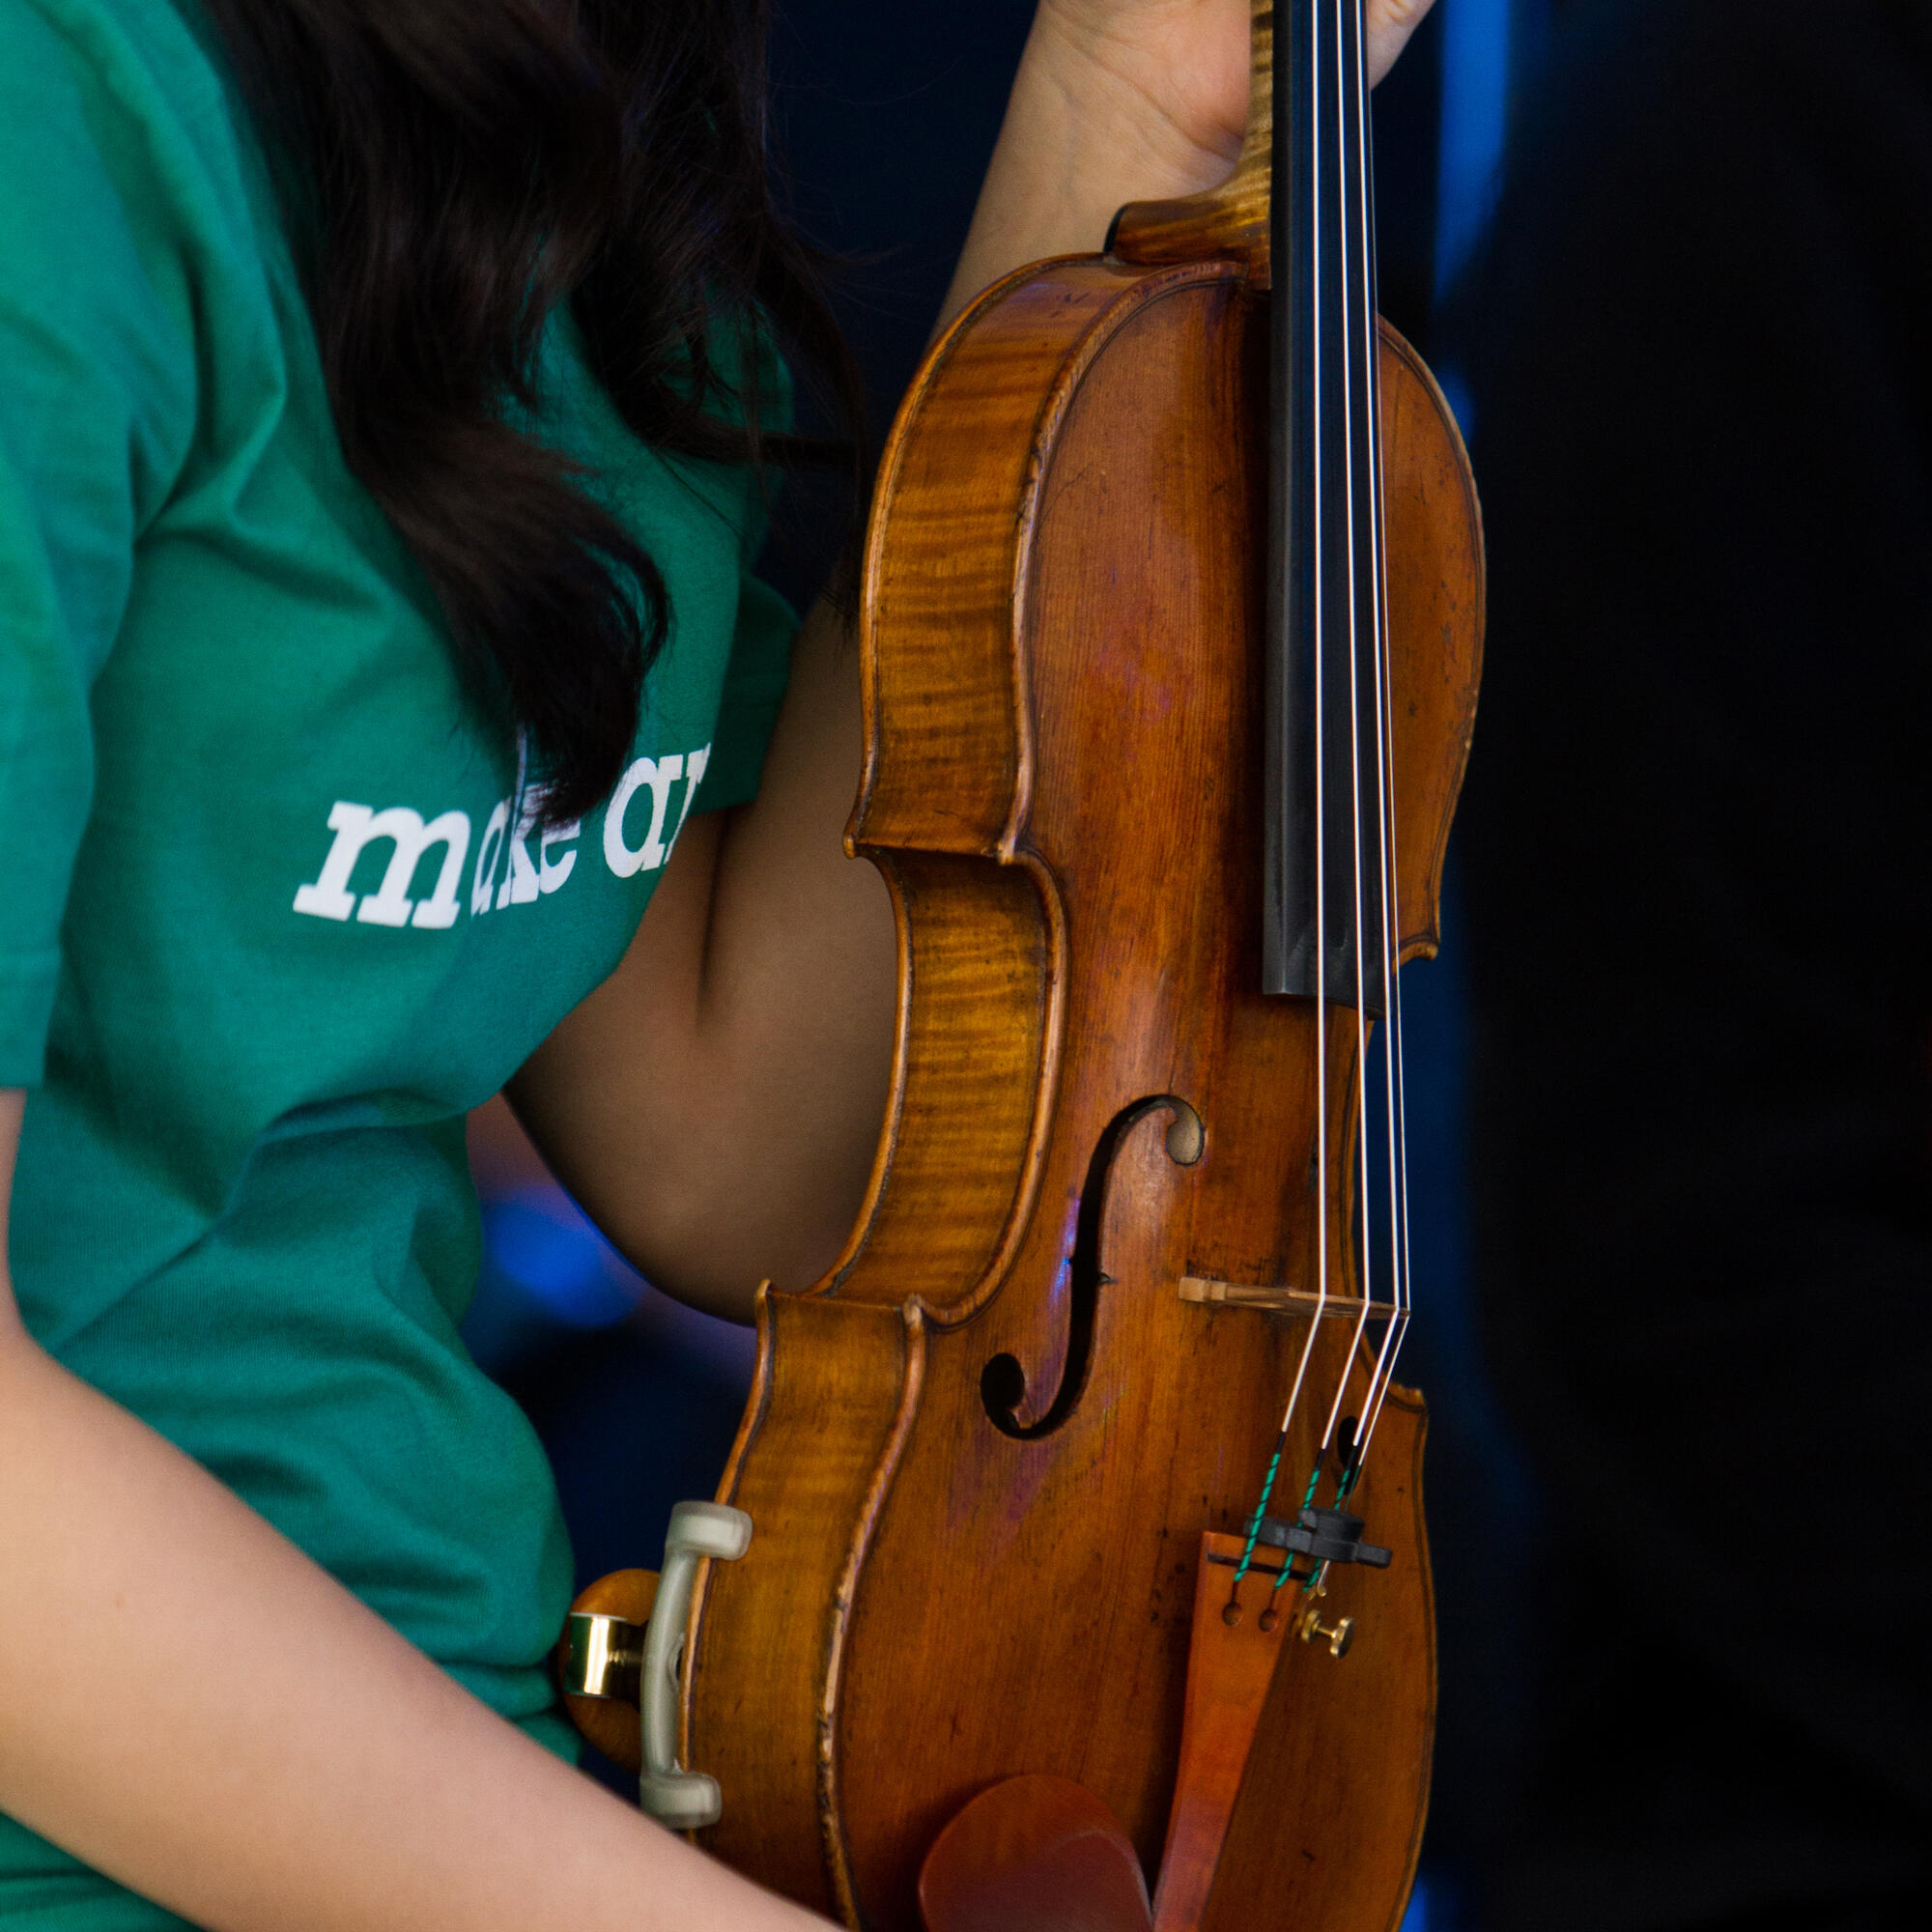 Detail photo of a student holding a violin